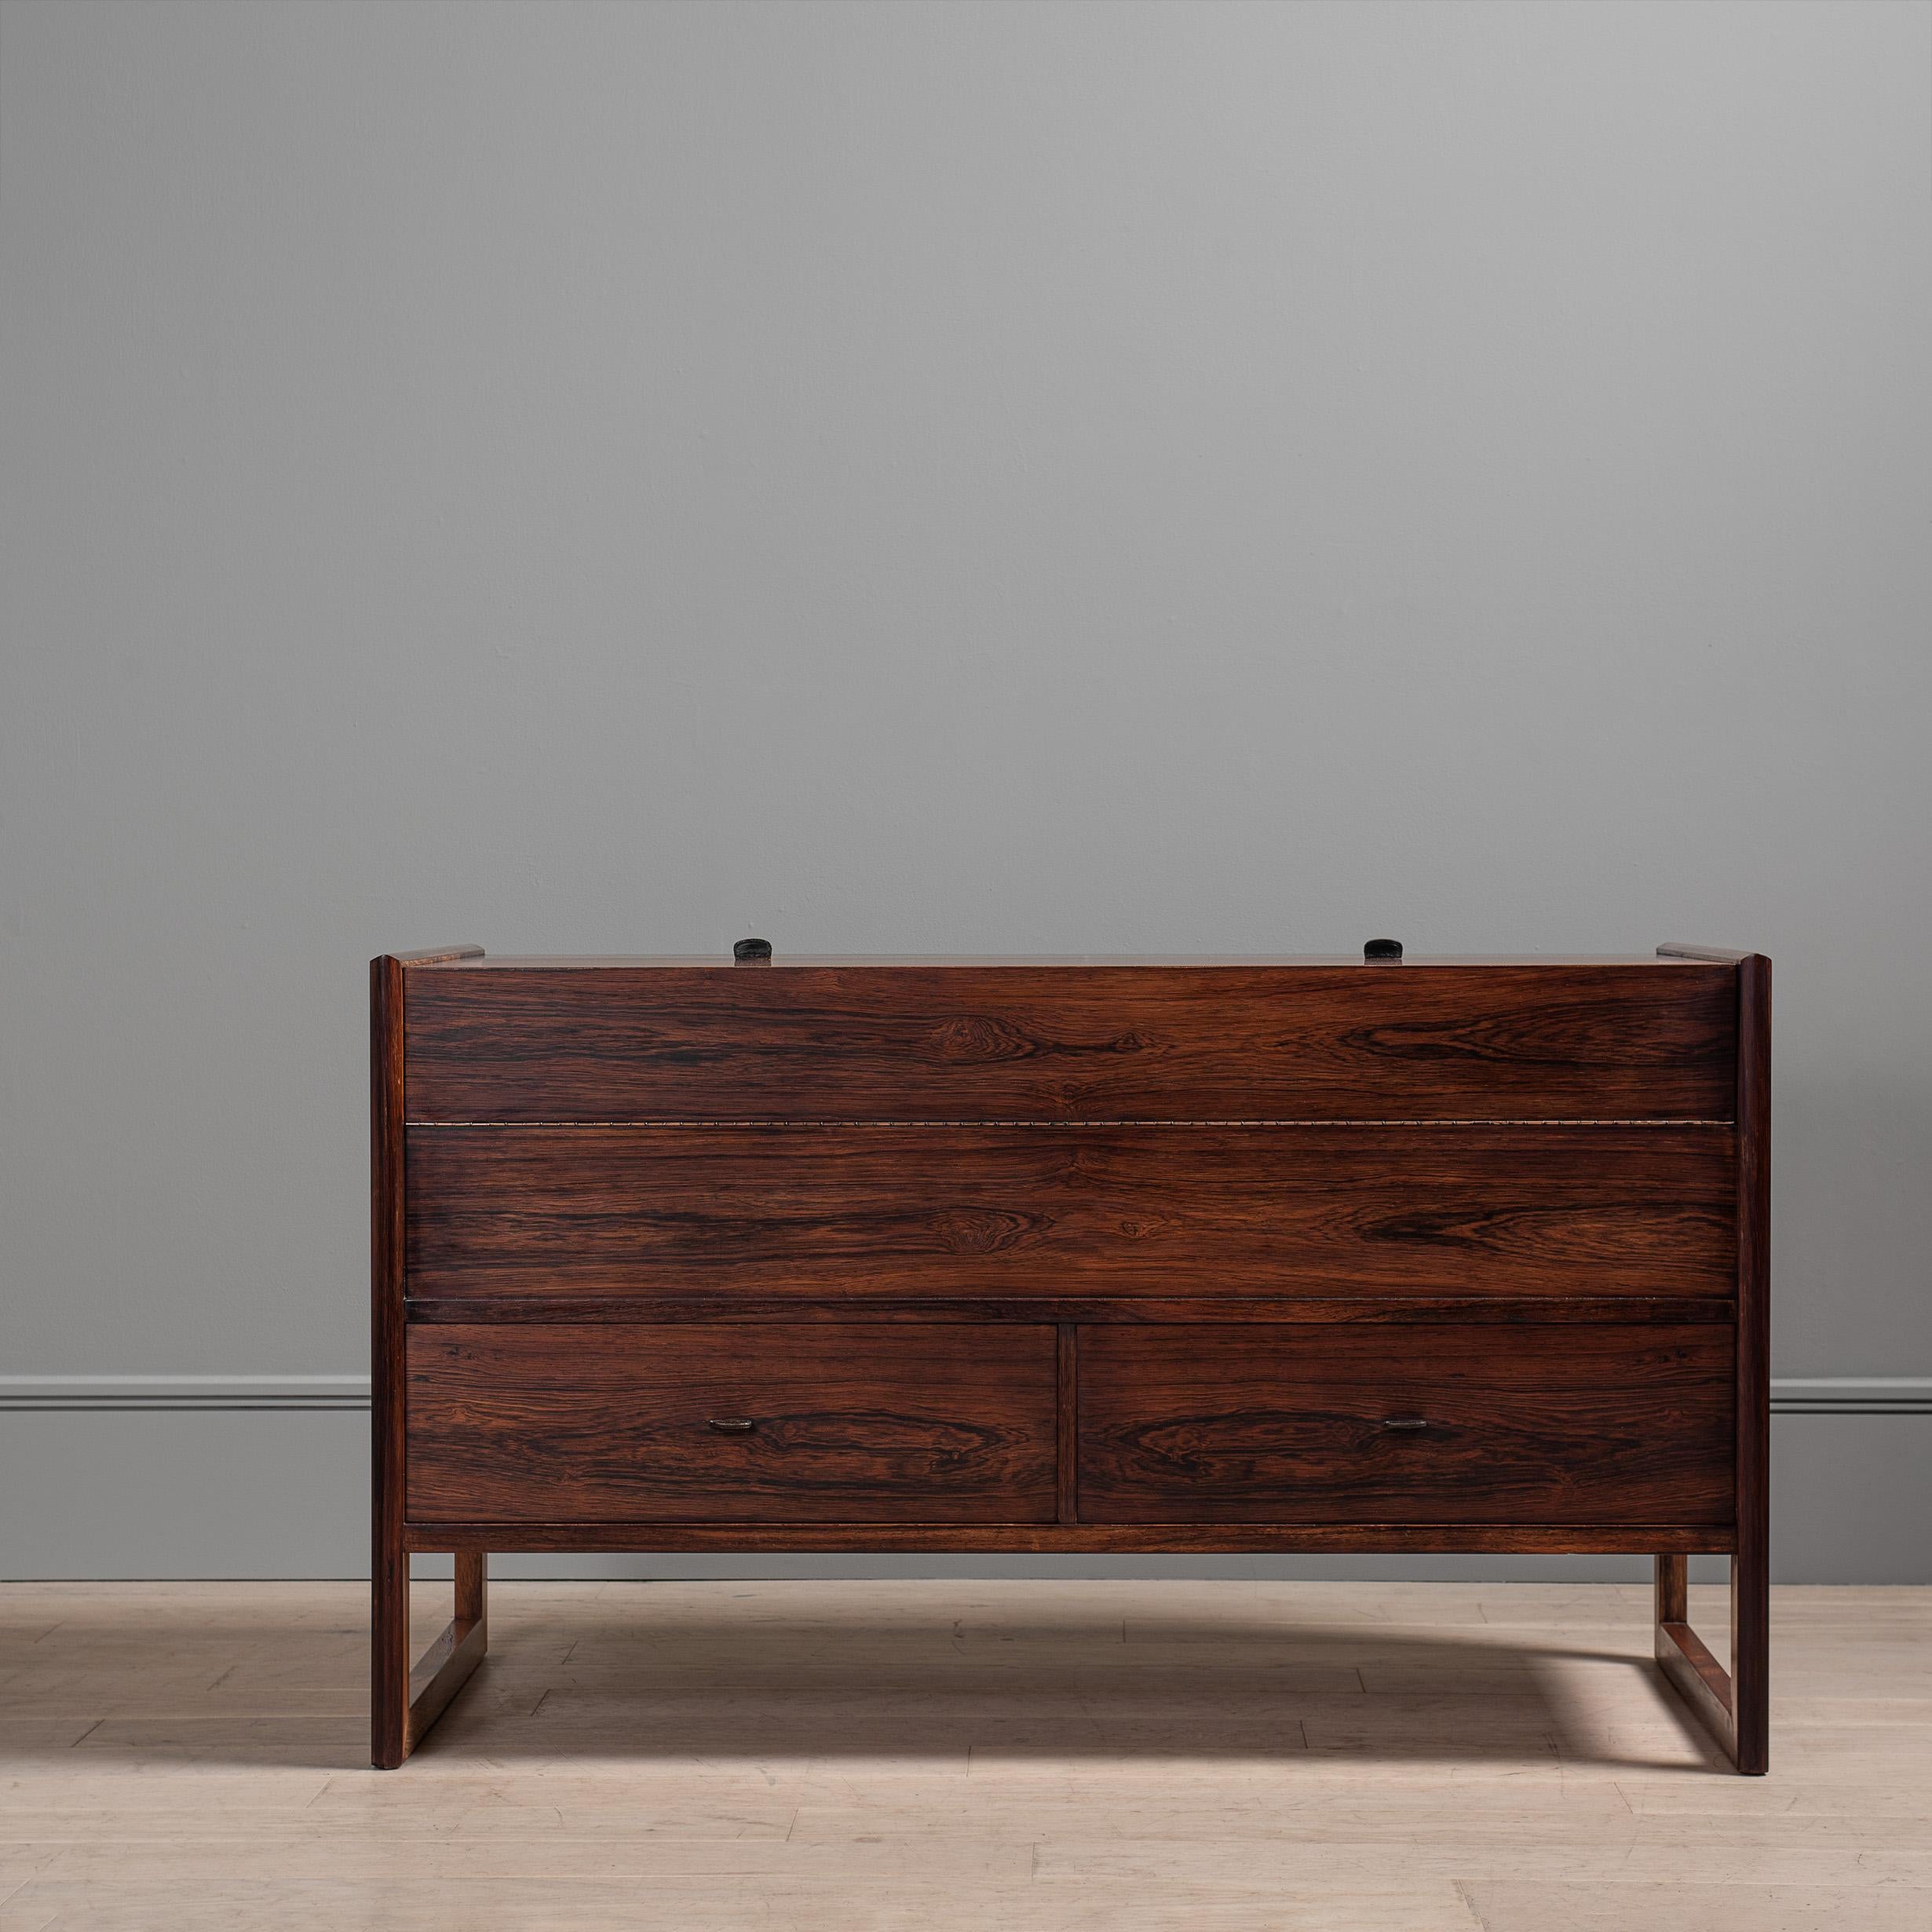 A highly unusual Scandinavian modernist piece of furniture. Flip top upper section with drawers below. Small leather inset handles. Sled design leg frame. Lovely design and a very practical storage piece. Great design and extremely well made with